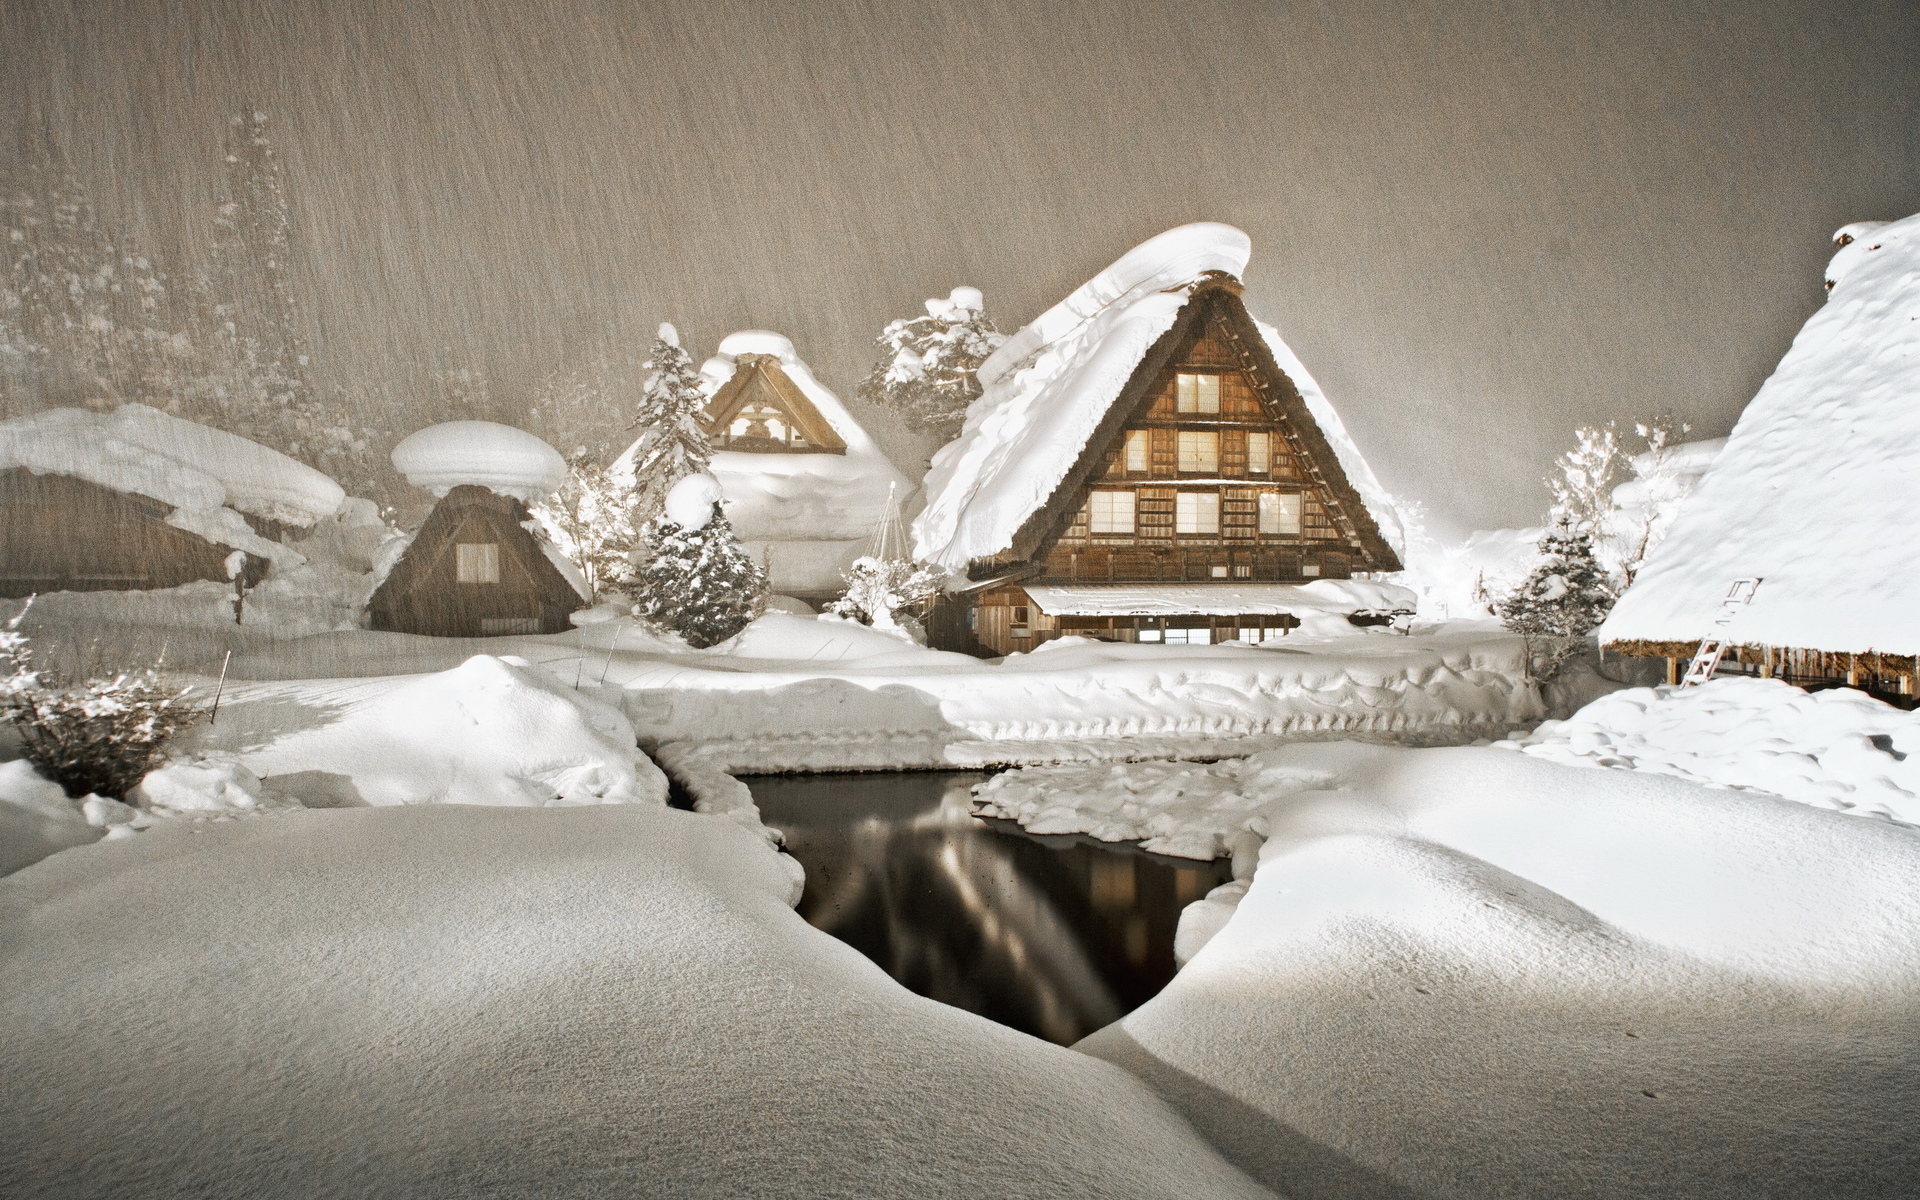 world, Architecture, Houses, Buildings, Cabins, Streams, Water, Reflection, Nature, Landscapes, Winter, Snow, Snowing, Flakes, Drops, Storm, Blizzard Wallpaper